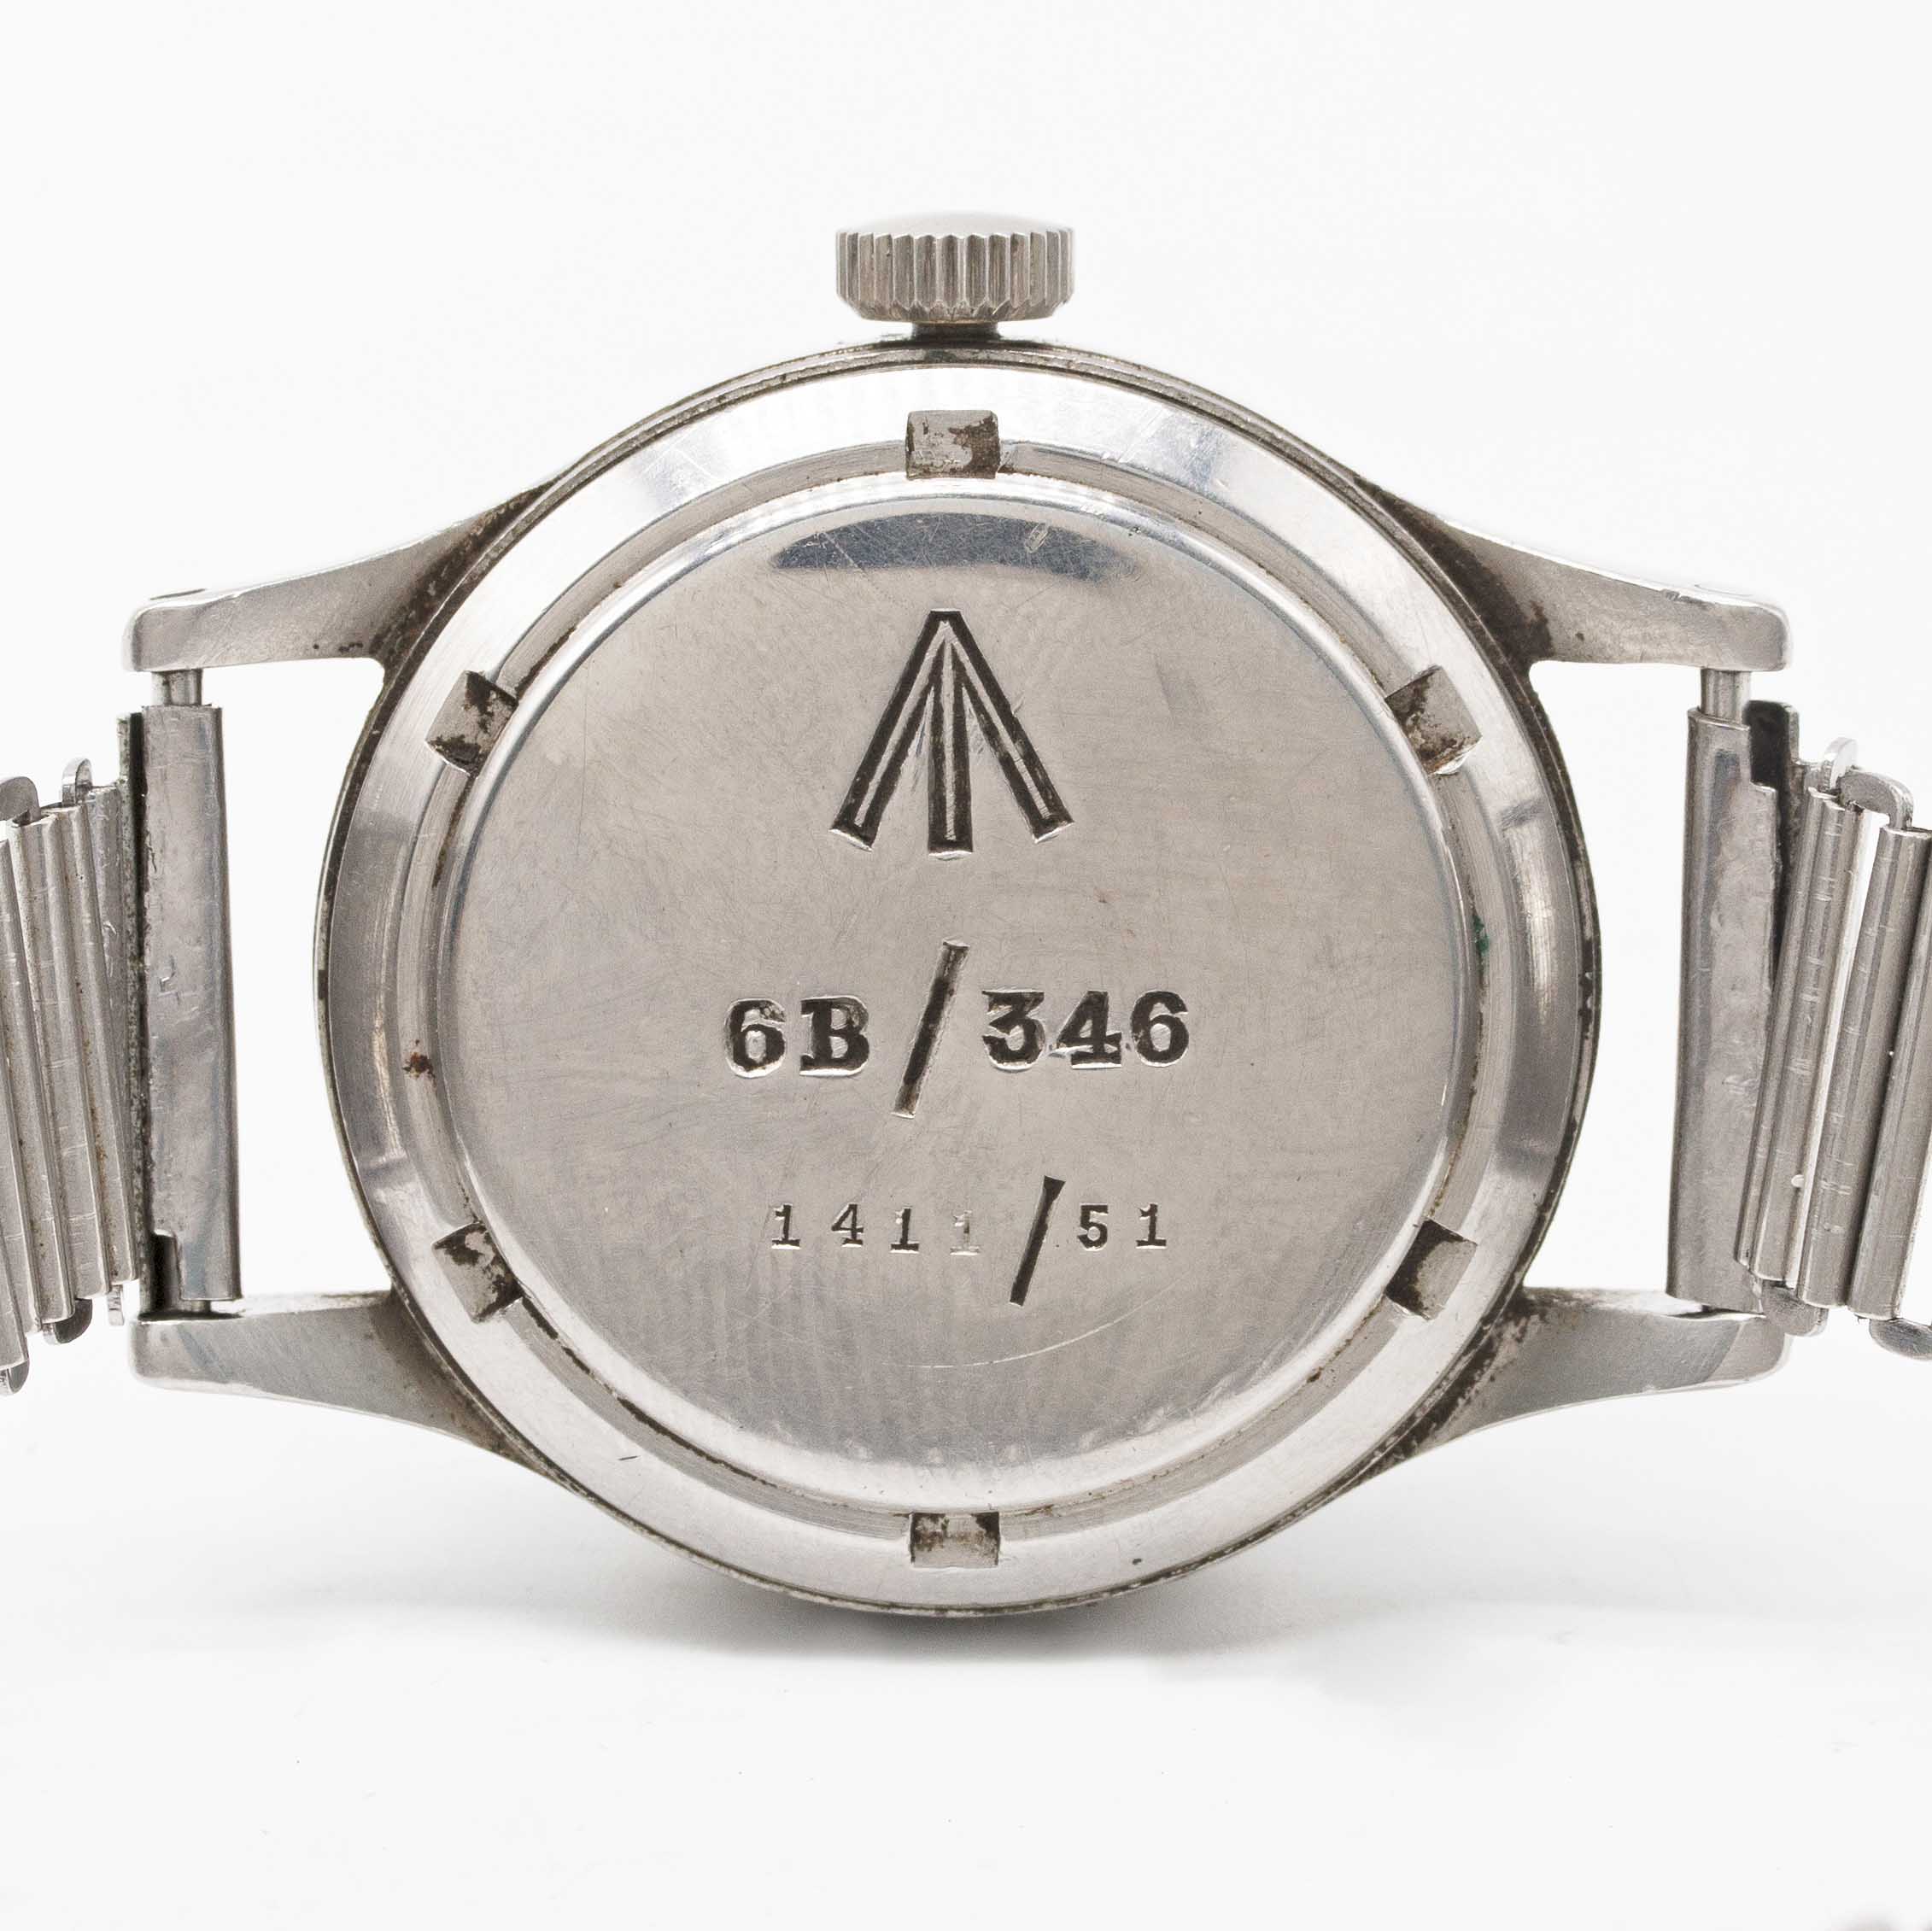 A GENTLEMAN'S STAINLESS STEEL BRITISH MILITARY IWC MARK 11 RAF PILOTS BRACELET WATCH DATED 1951 - Image 8 of 12